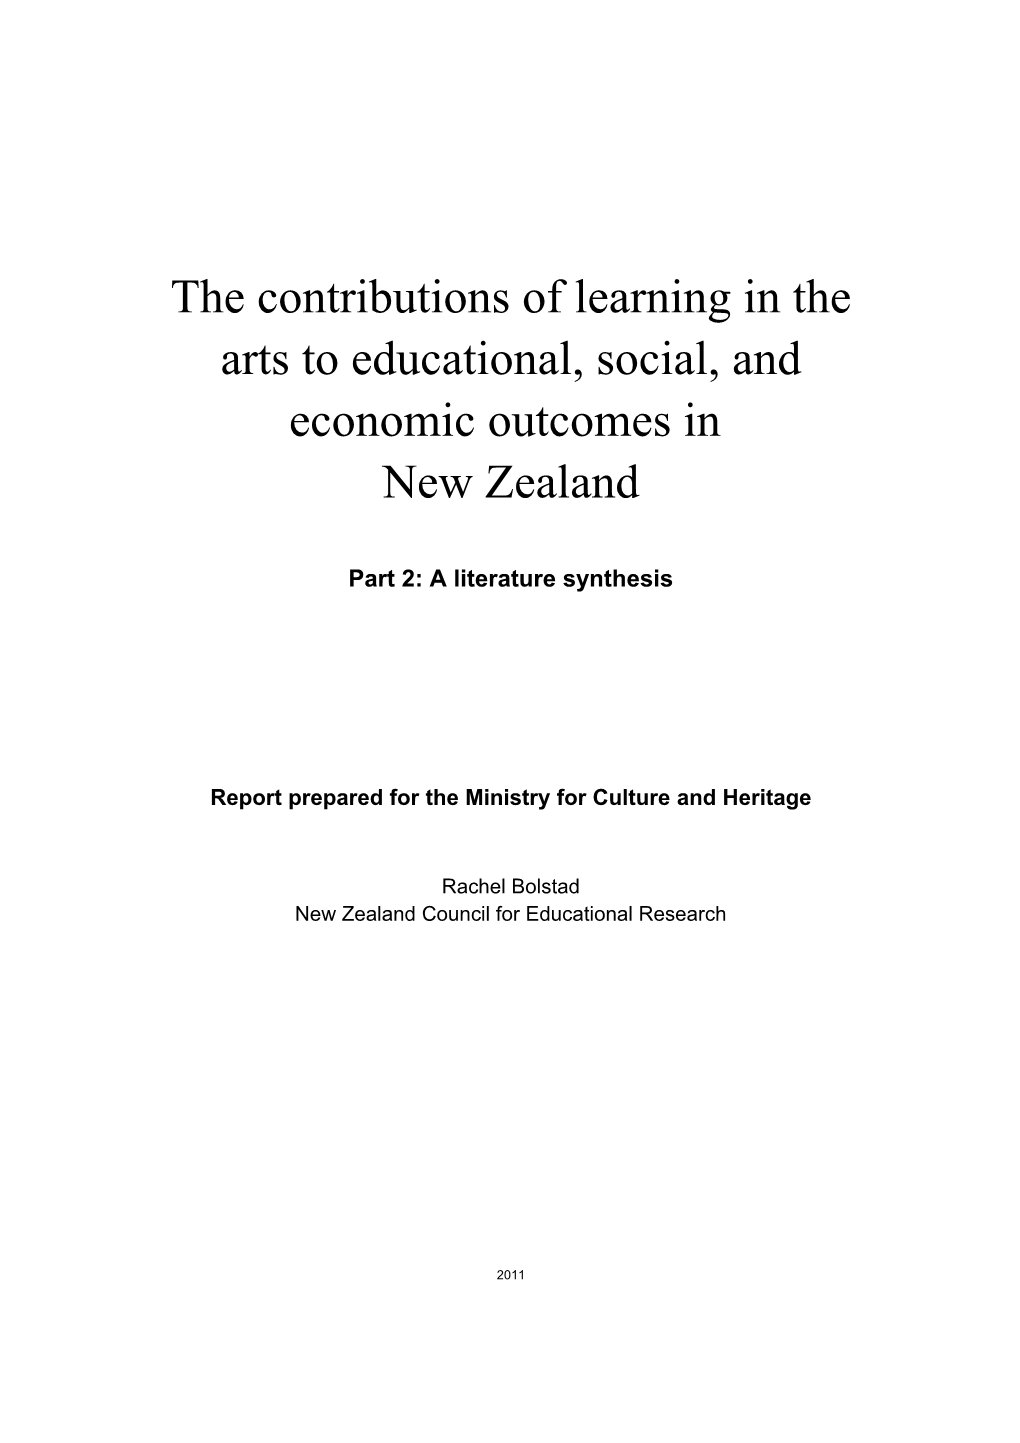 The Contributions of Learning in the Arts to Educational, Social, Cultural and Economic